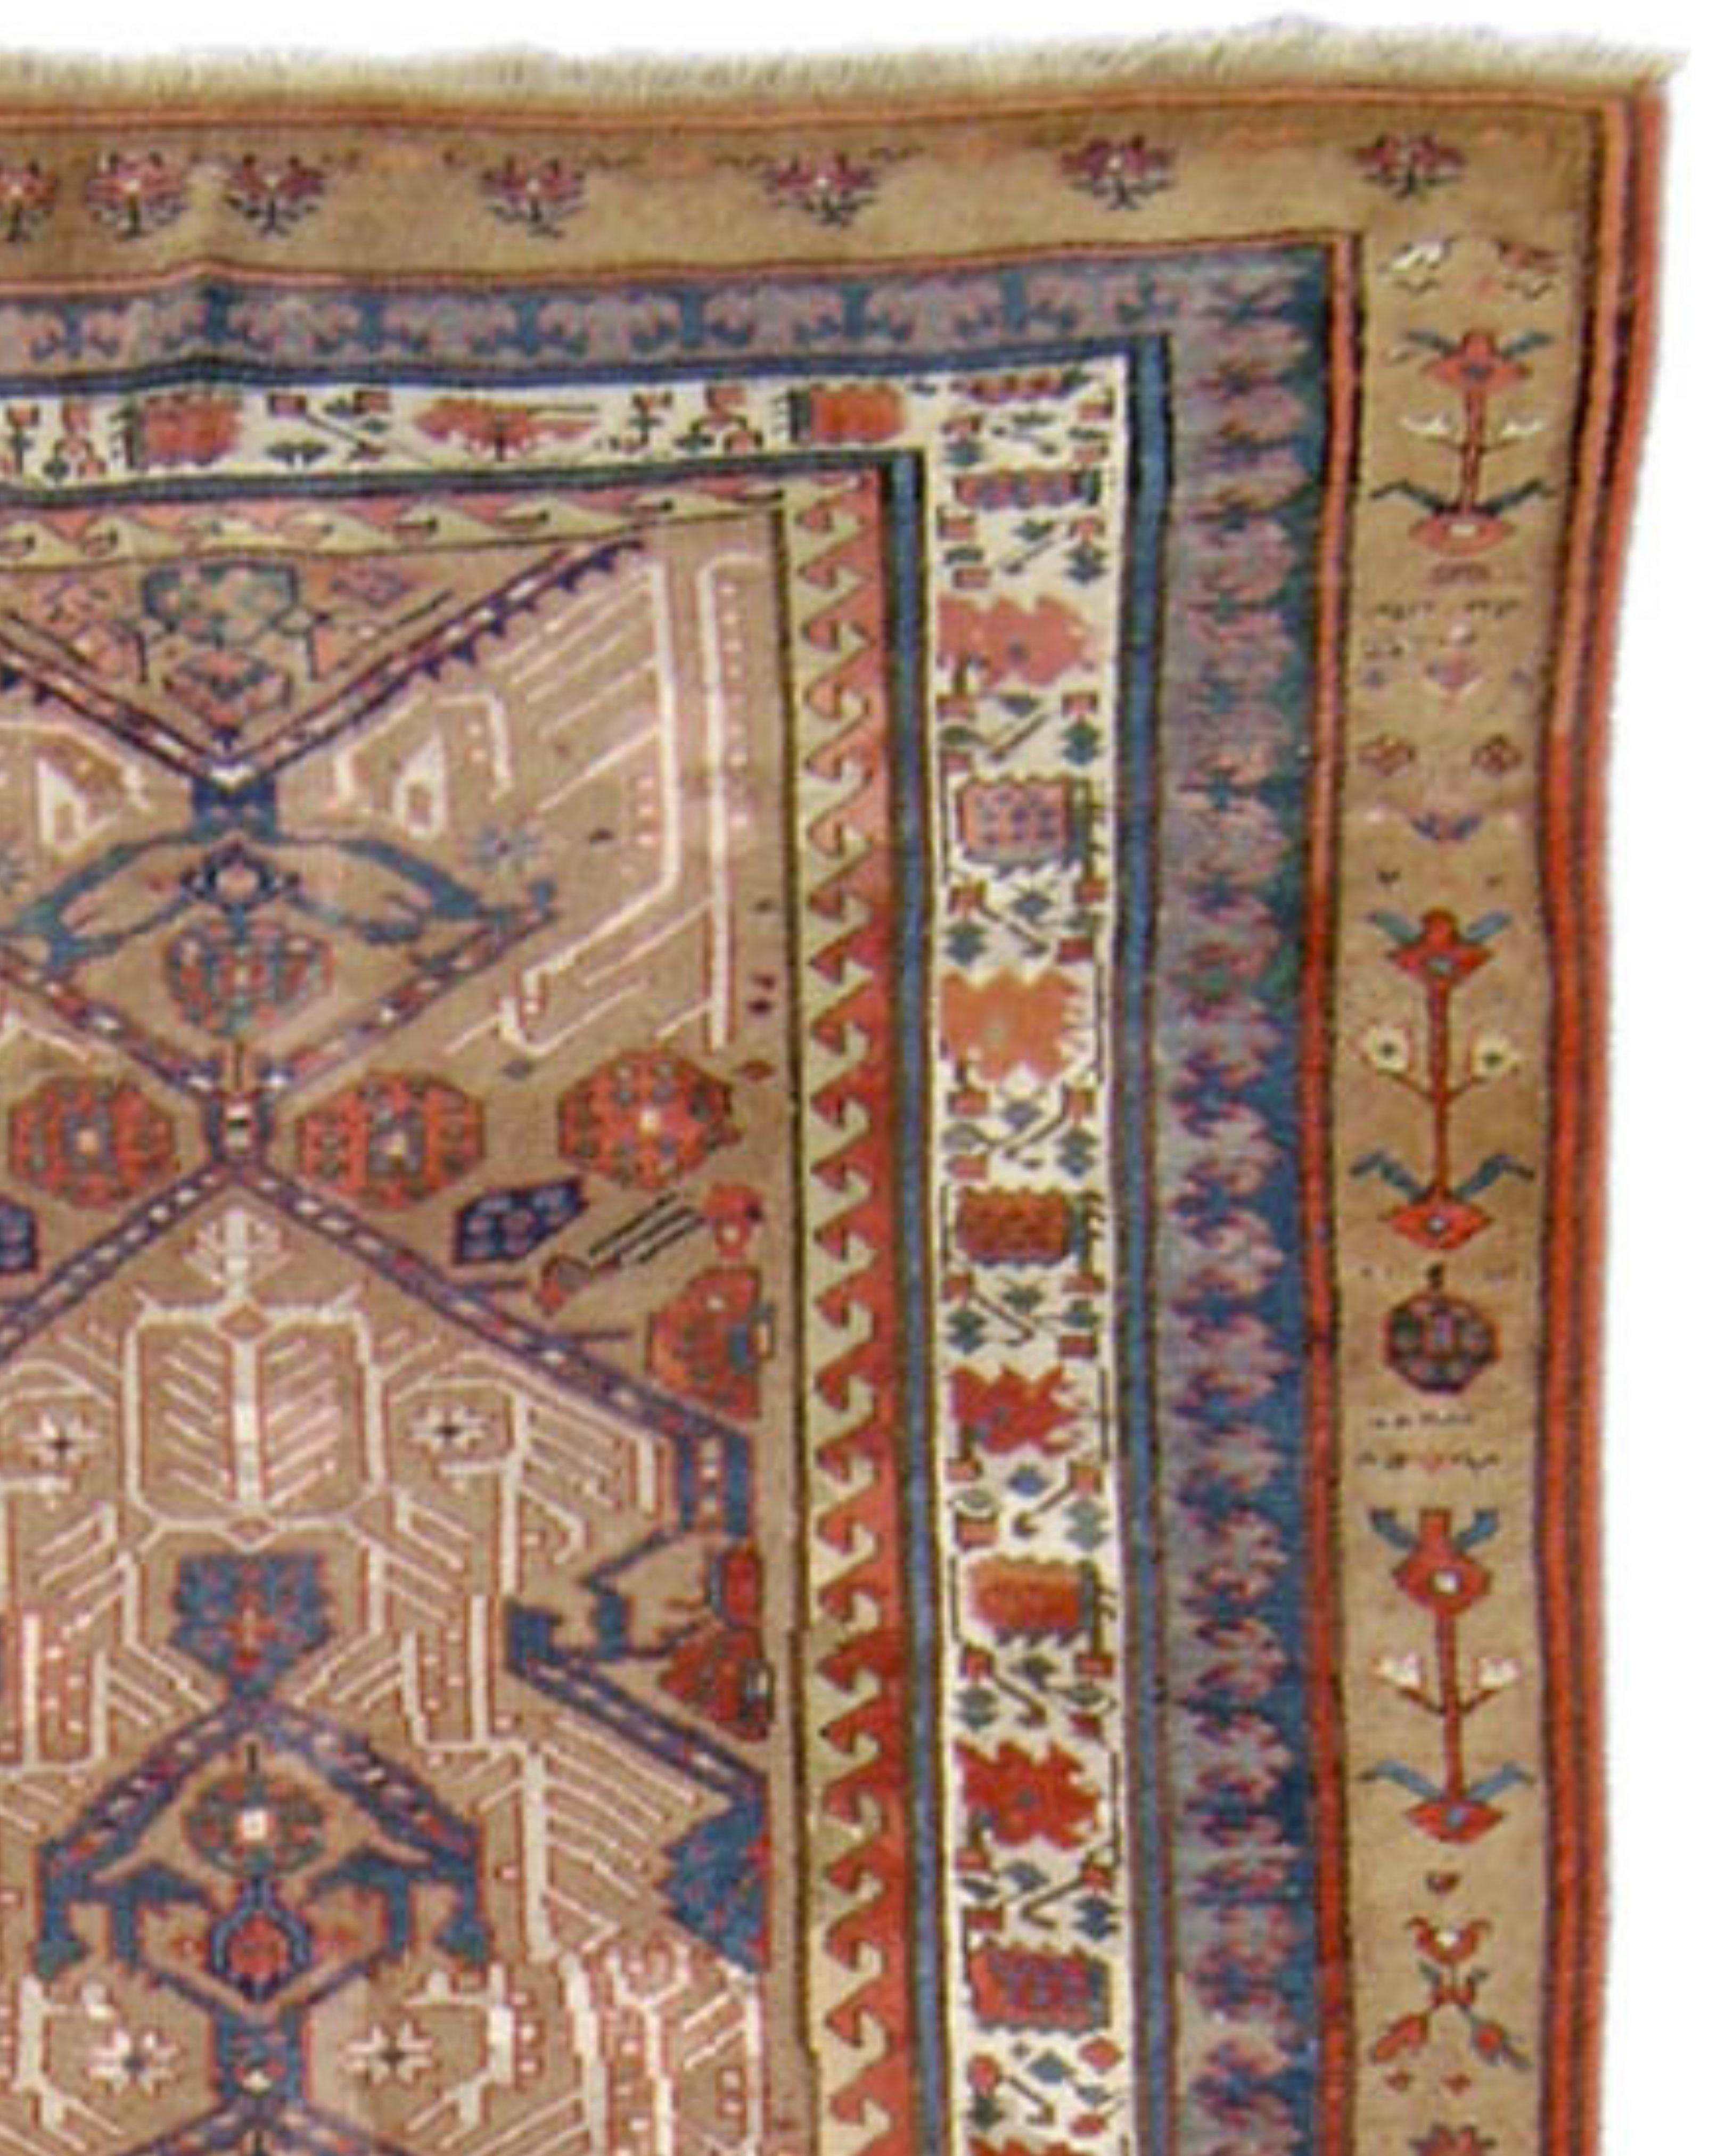 Ancien tapis persan Serab, 19e siècle

Informations supplémentaires :
Dimensions : 4'11